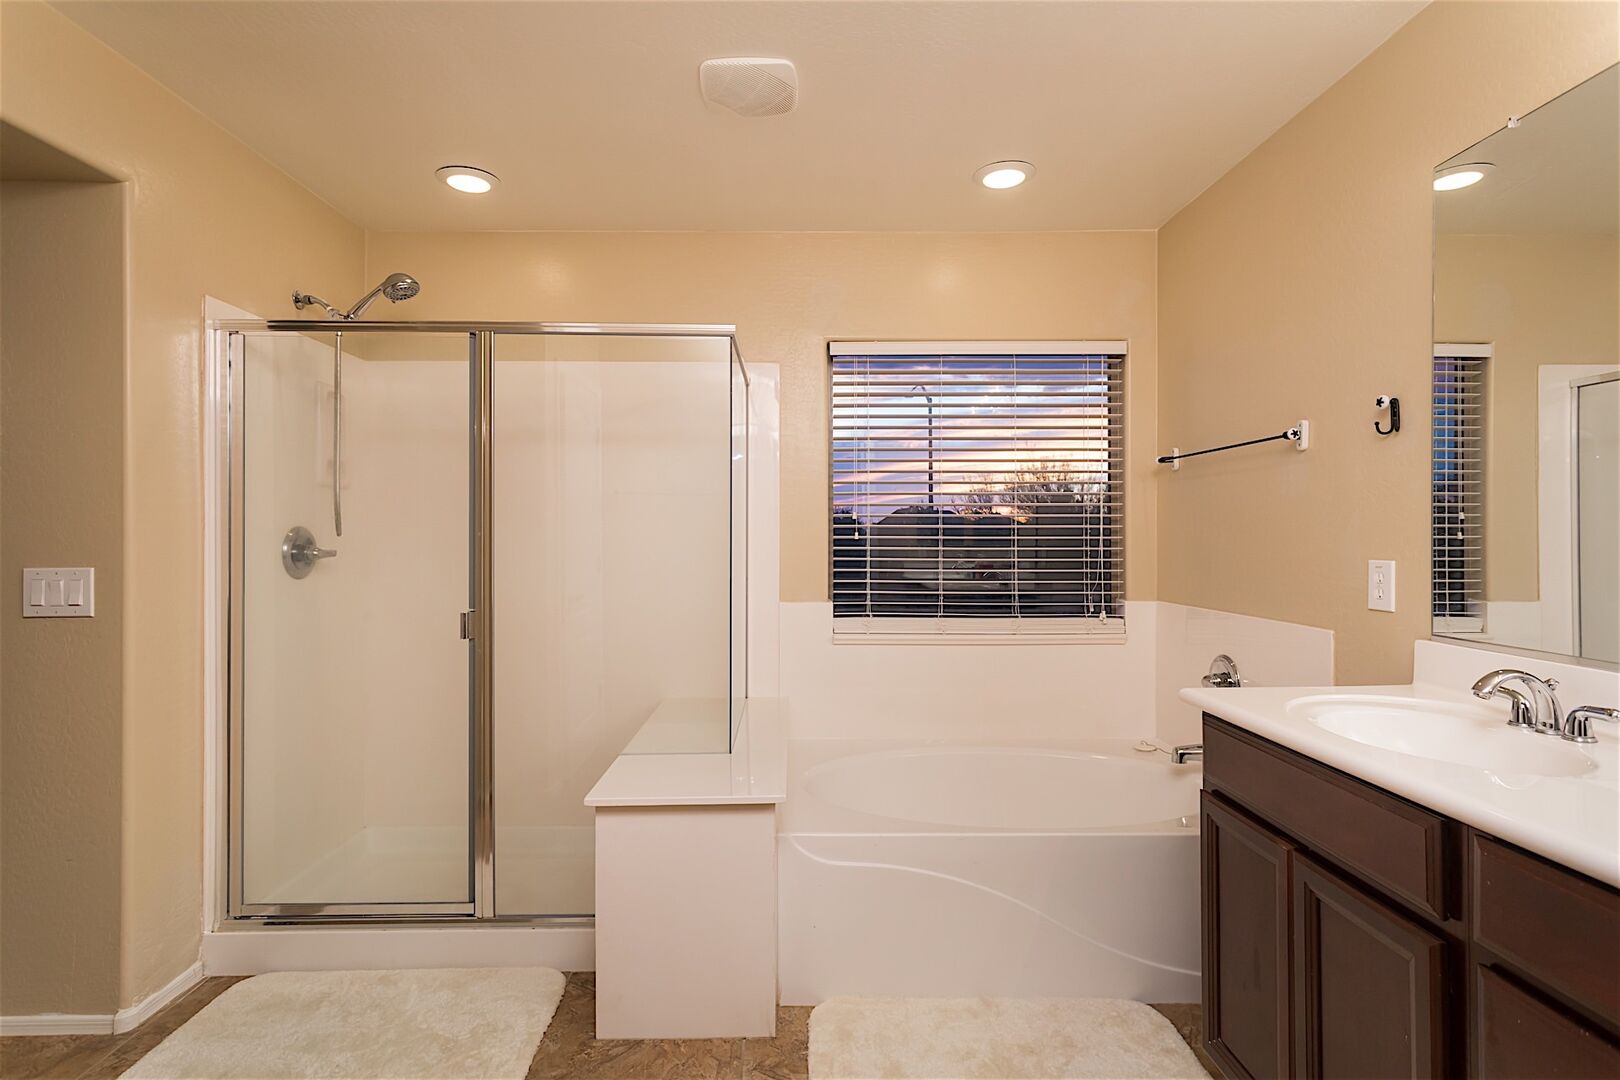 Separate Tub and shower